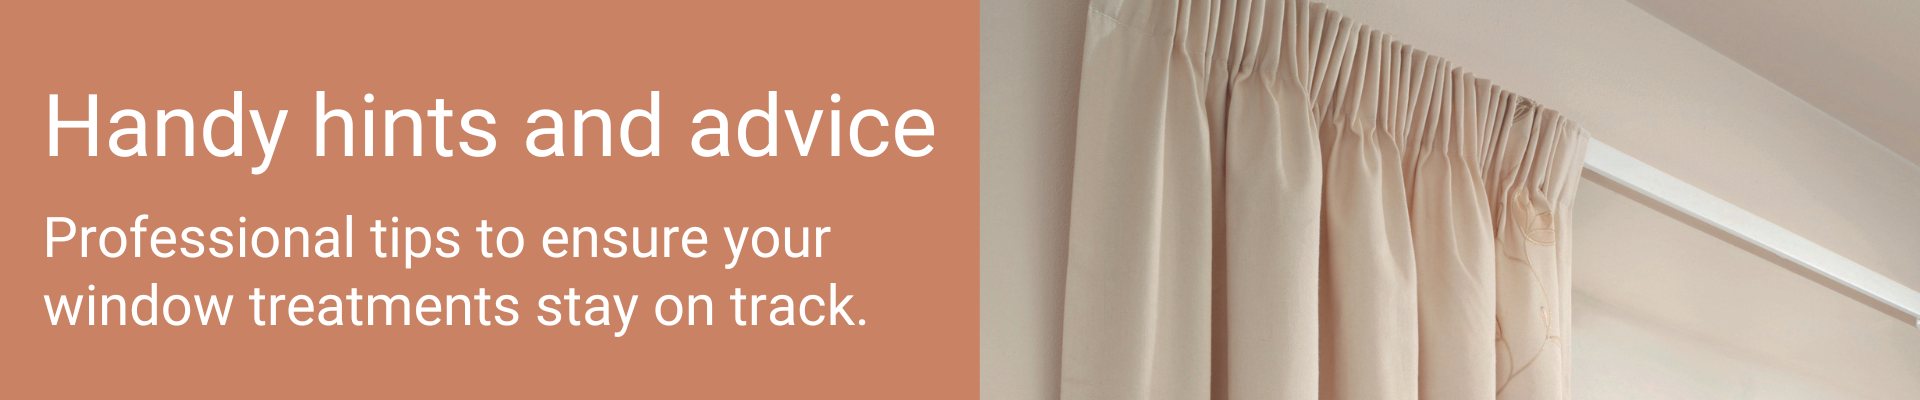 Curtain track hints and advice on measuring and fitting